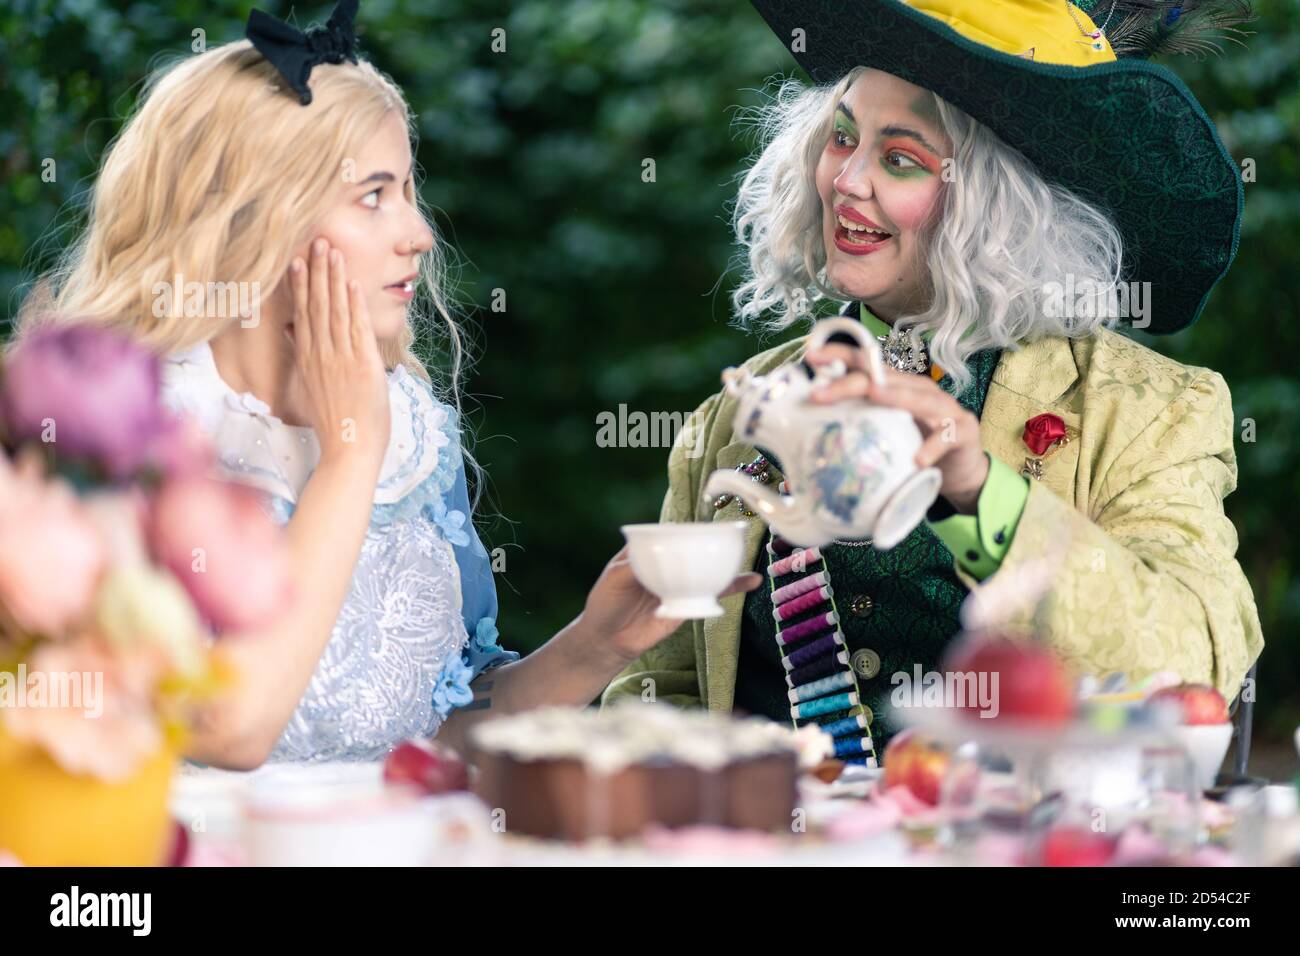 https://c8.alamy.com/comp/2D54C2F/munich-germany-sep-12-2020-cosplayer-as-characters-from-alice-in-wonderland-tea-party-with-alice-the-crazy-hatter-and-the-white-queen-2D54C2F.jpg